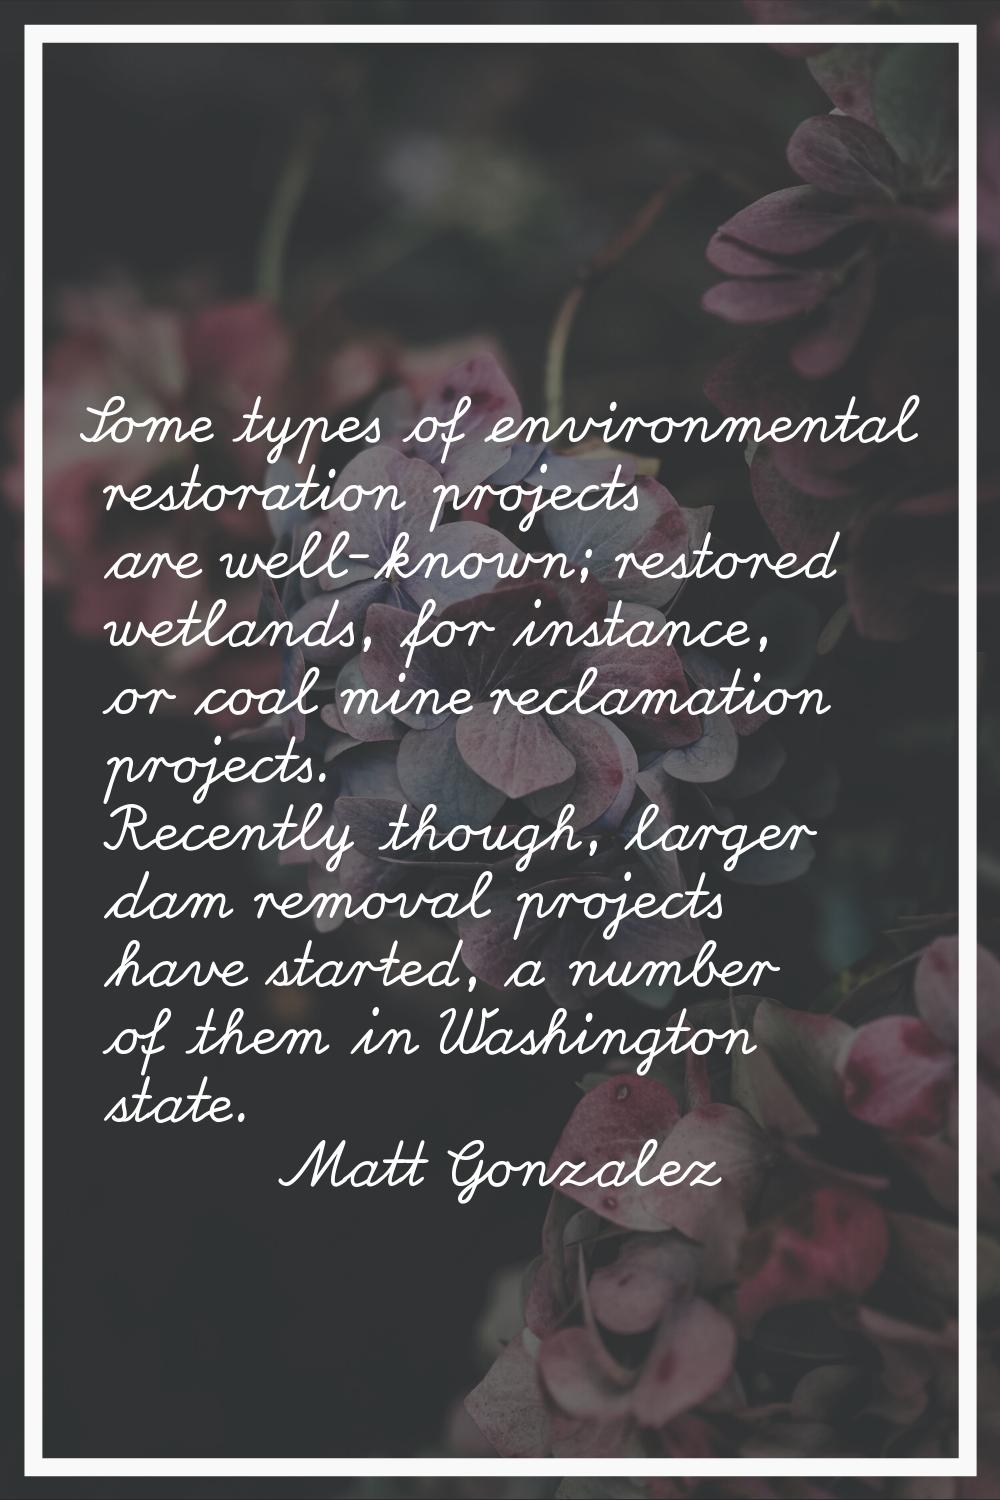 Some types of environmental restoration projects are well-known; restored wetlands, for instance, o